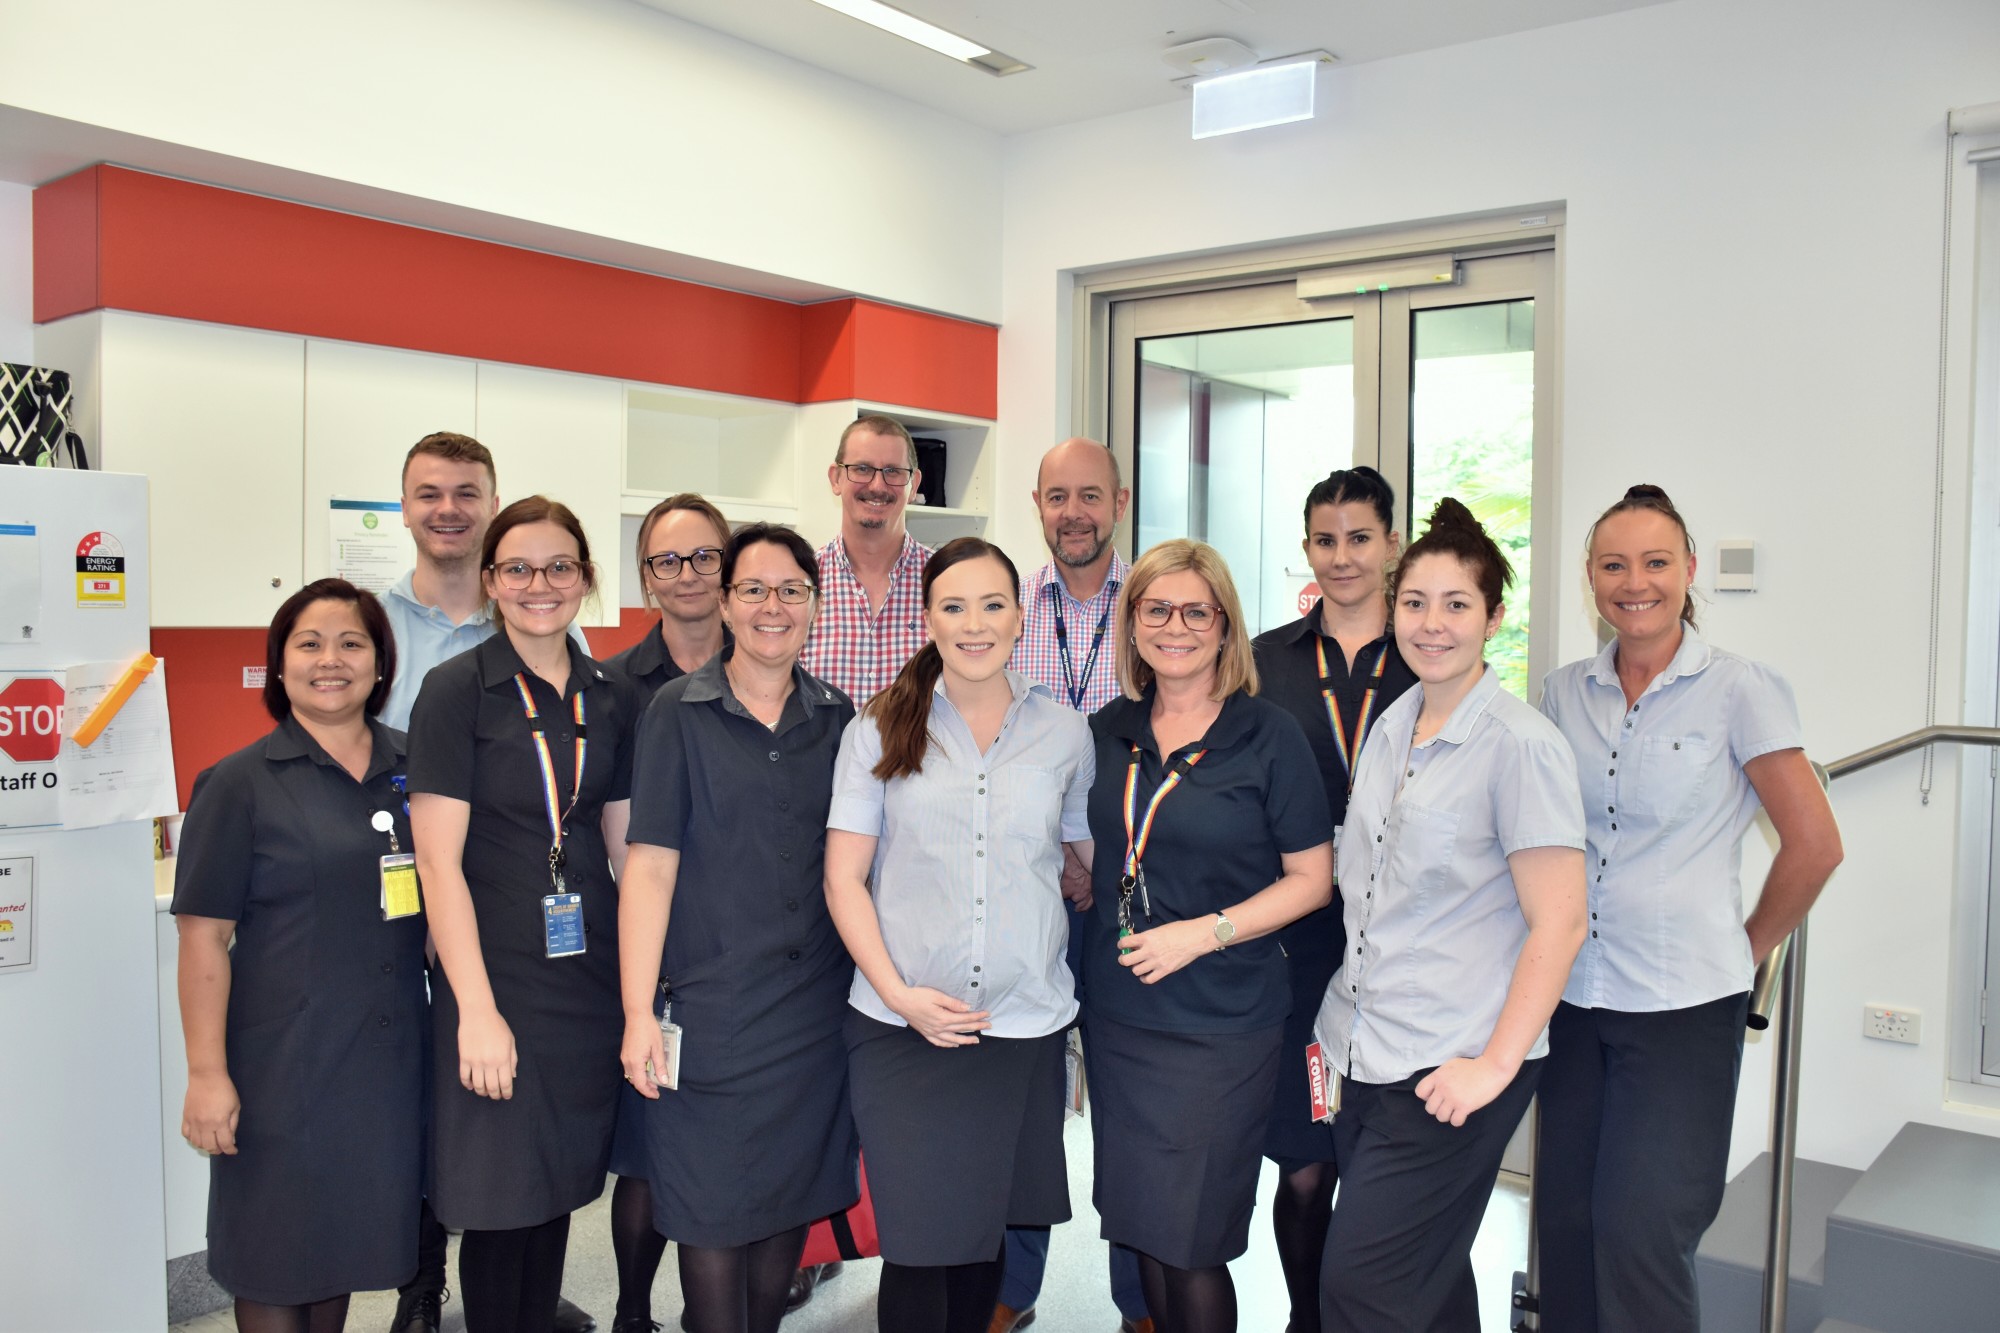 Director of Orthopaedics Dr Jonathan Smith and Acting Chief Executive Marc Warner (back row) with some of the ward's staff.